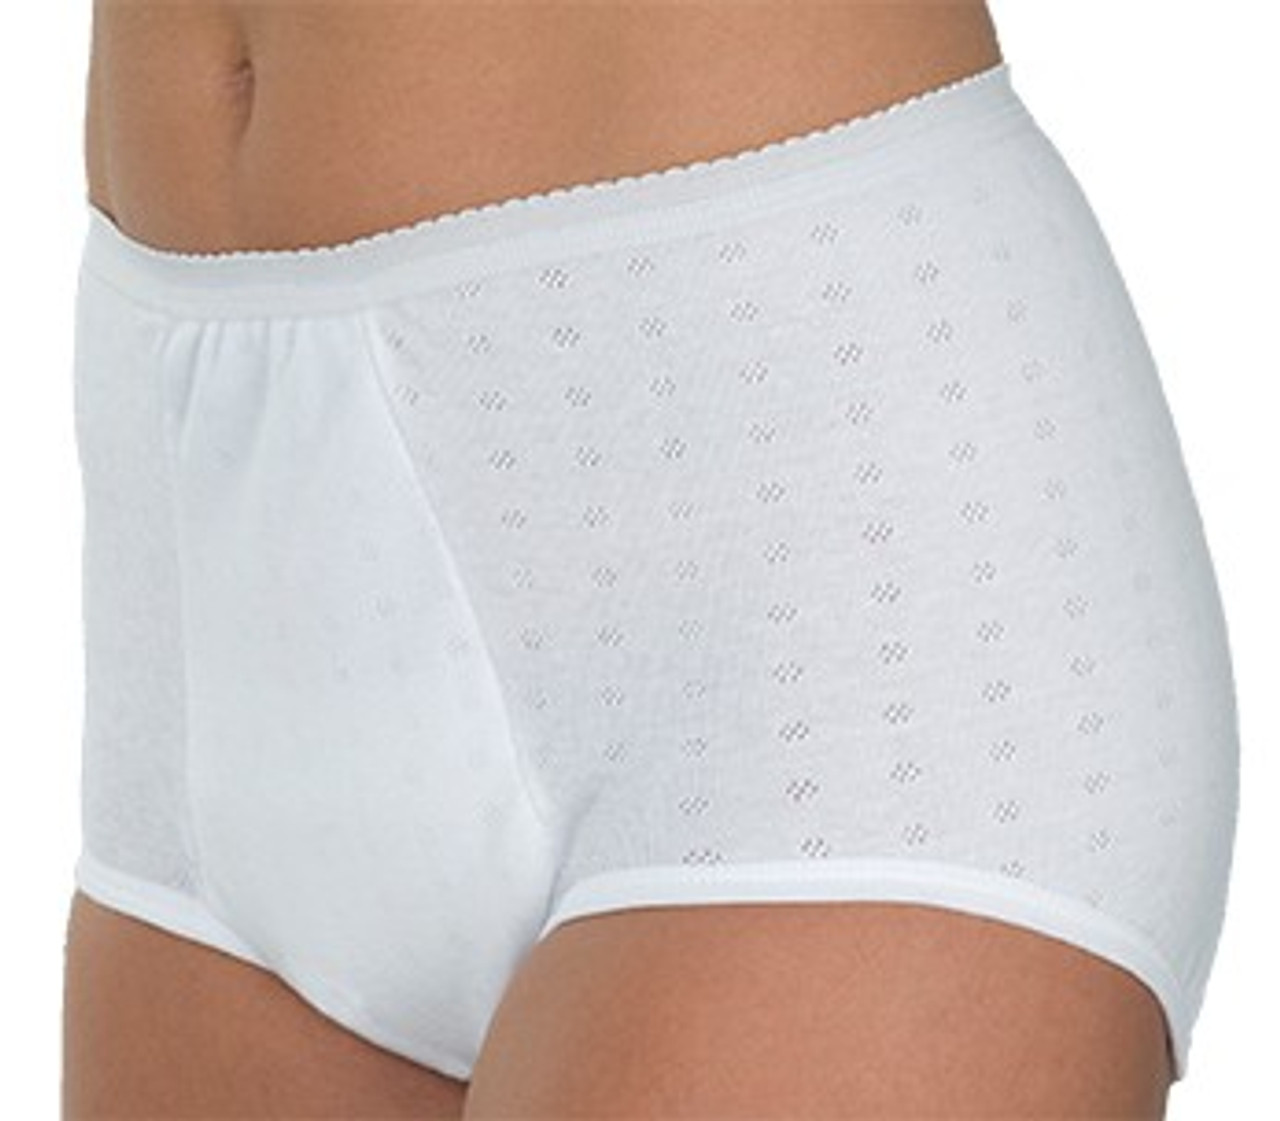 Wearever HDL100-WHITE-4XL-3PK Women's Super Incontinence Panties Washable Reusable Bladder Control Briefs (Pack of 3)